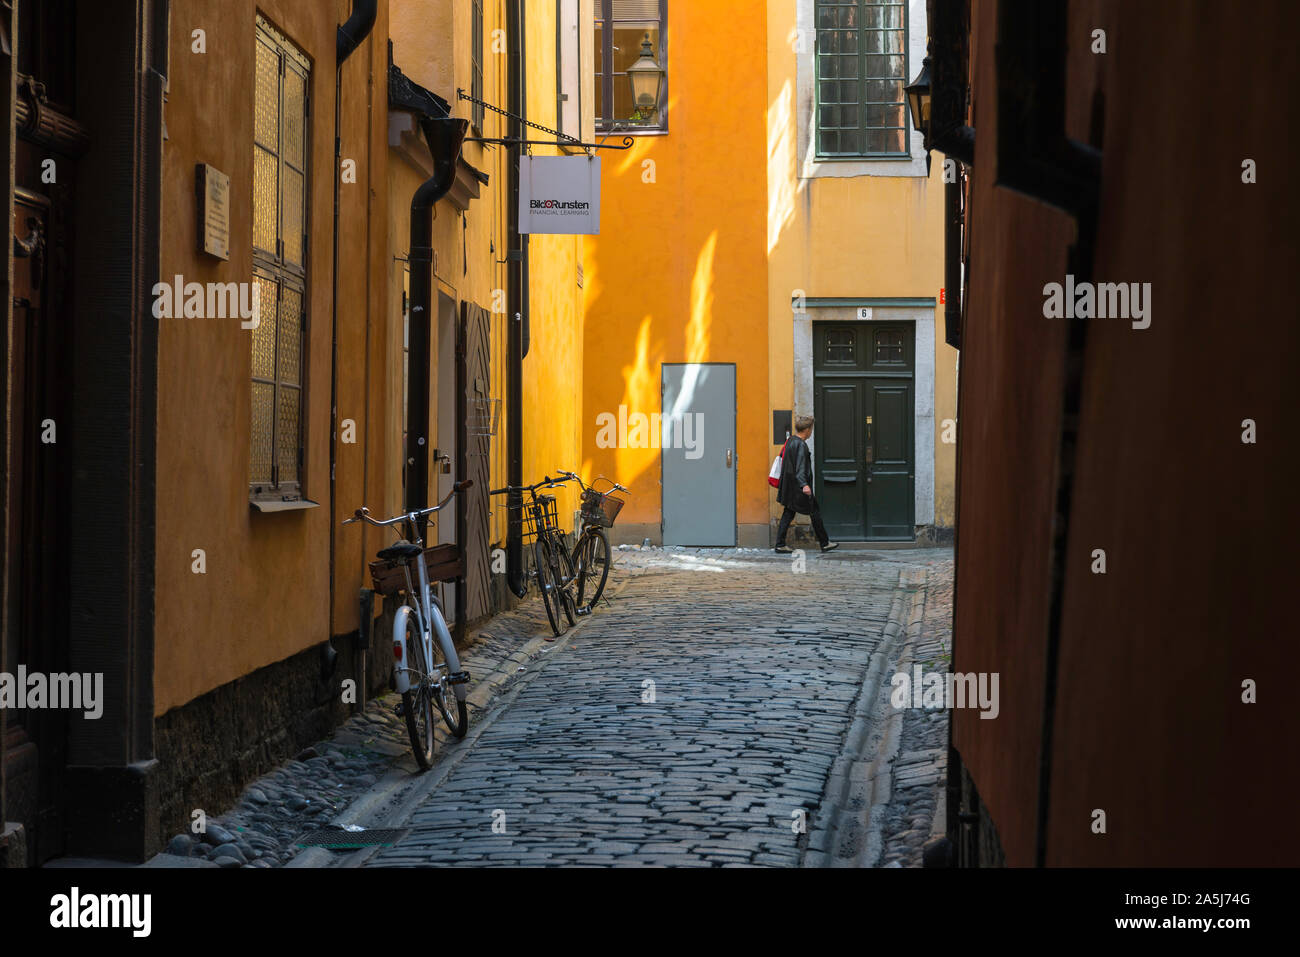 Sweden color Stockholm, view of a typical cobbled street in the historic Old Town (Gamla Stan) area of Stockholm city center, Sweden Stock Photo